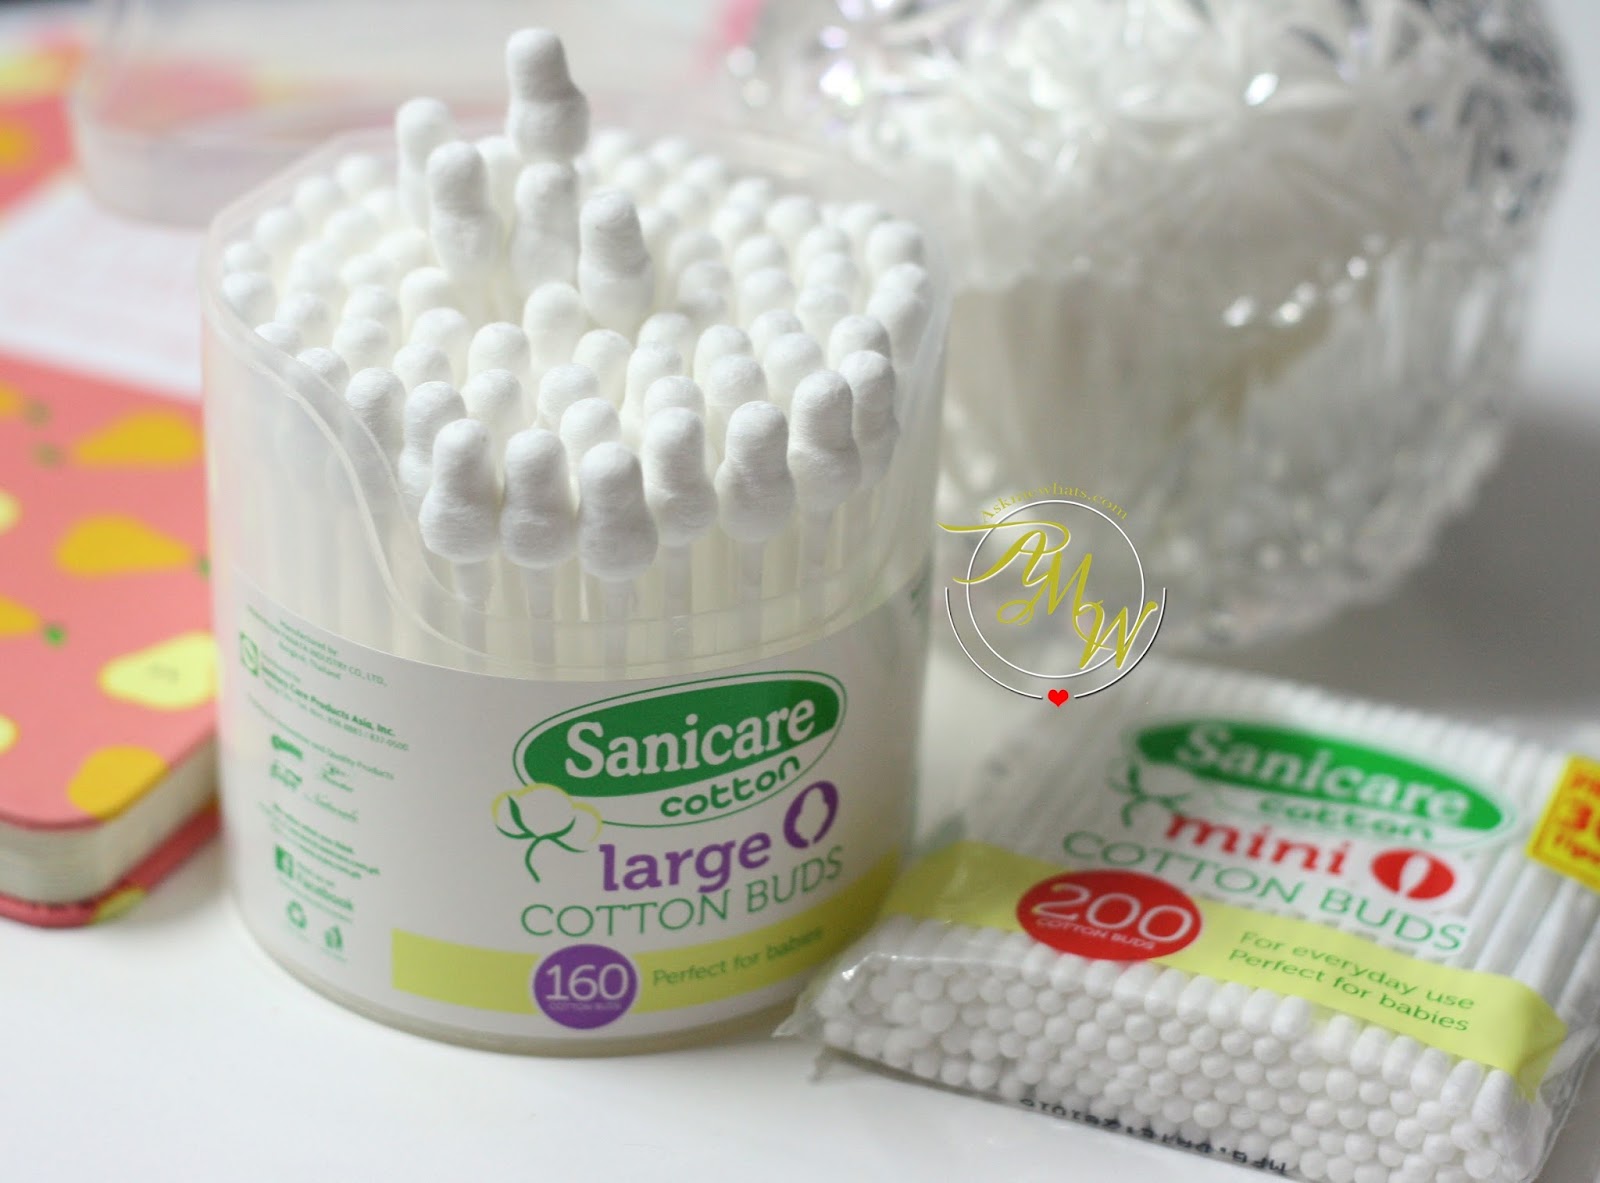 Sanicare - Did you know that: our Sanicare cotton balls comes in